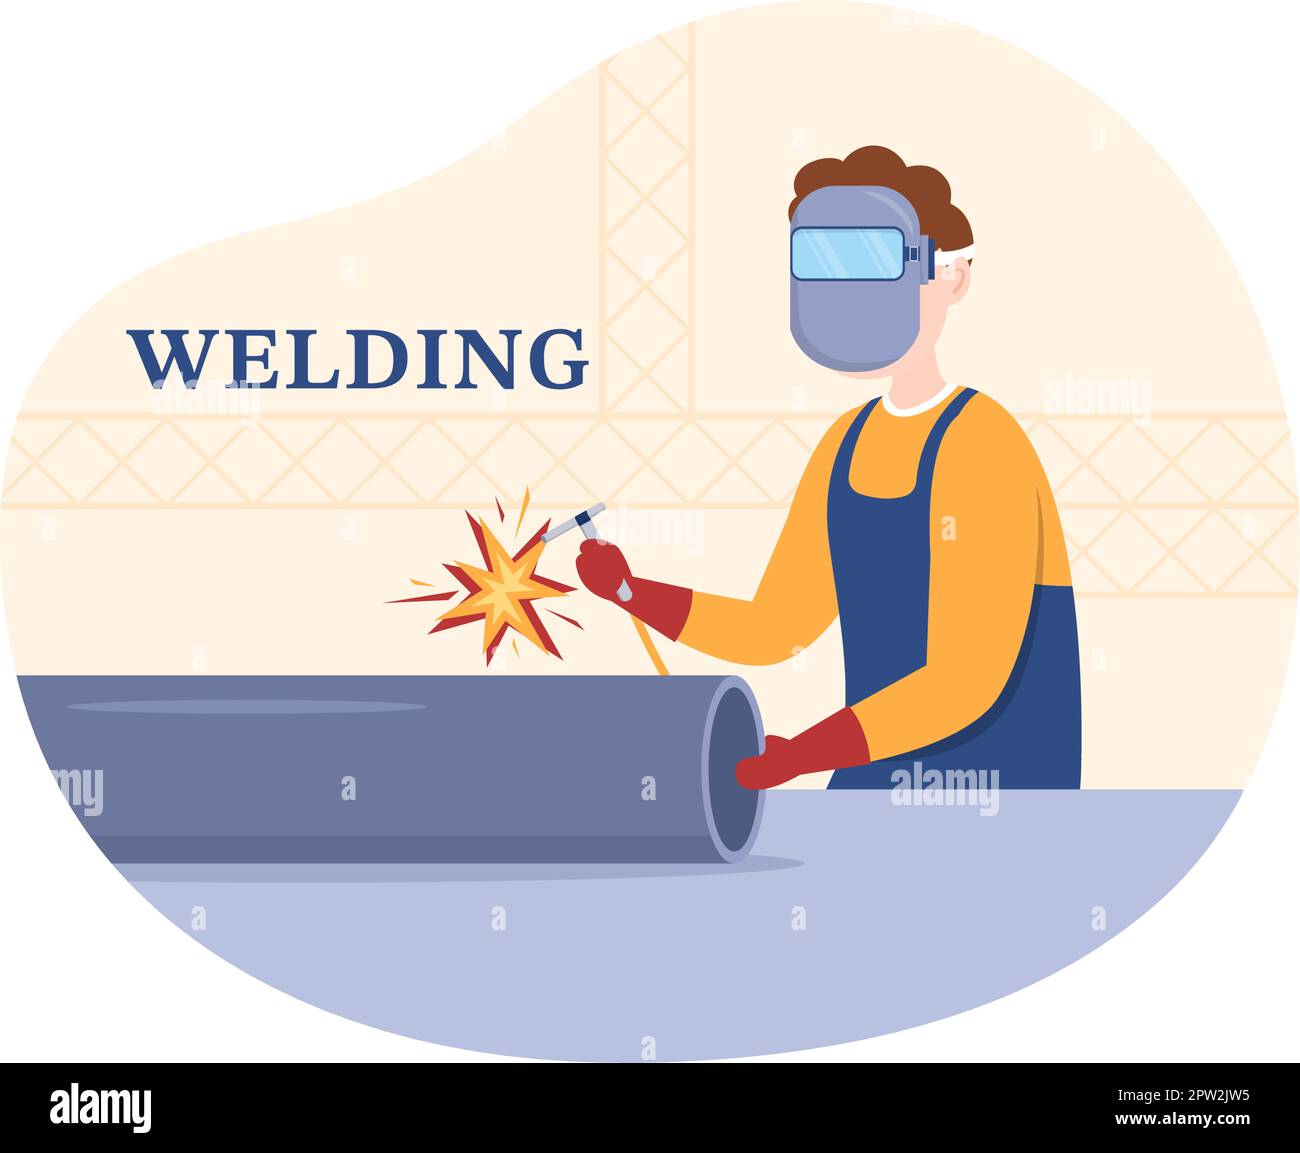 Welding Service with Professional Welder Job Weld Metal Structures, Pipe and Steel Construction in Flat Cartoon Hand Drawn Templates Illustration Stock Vector